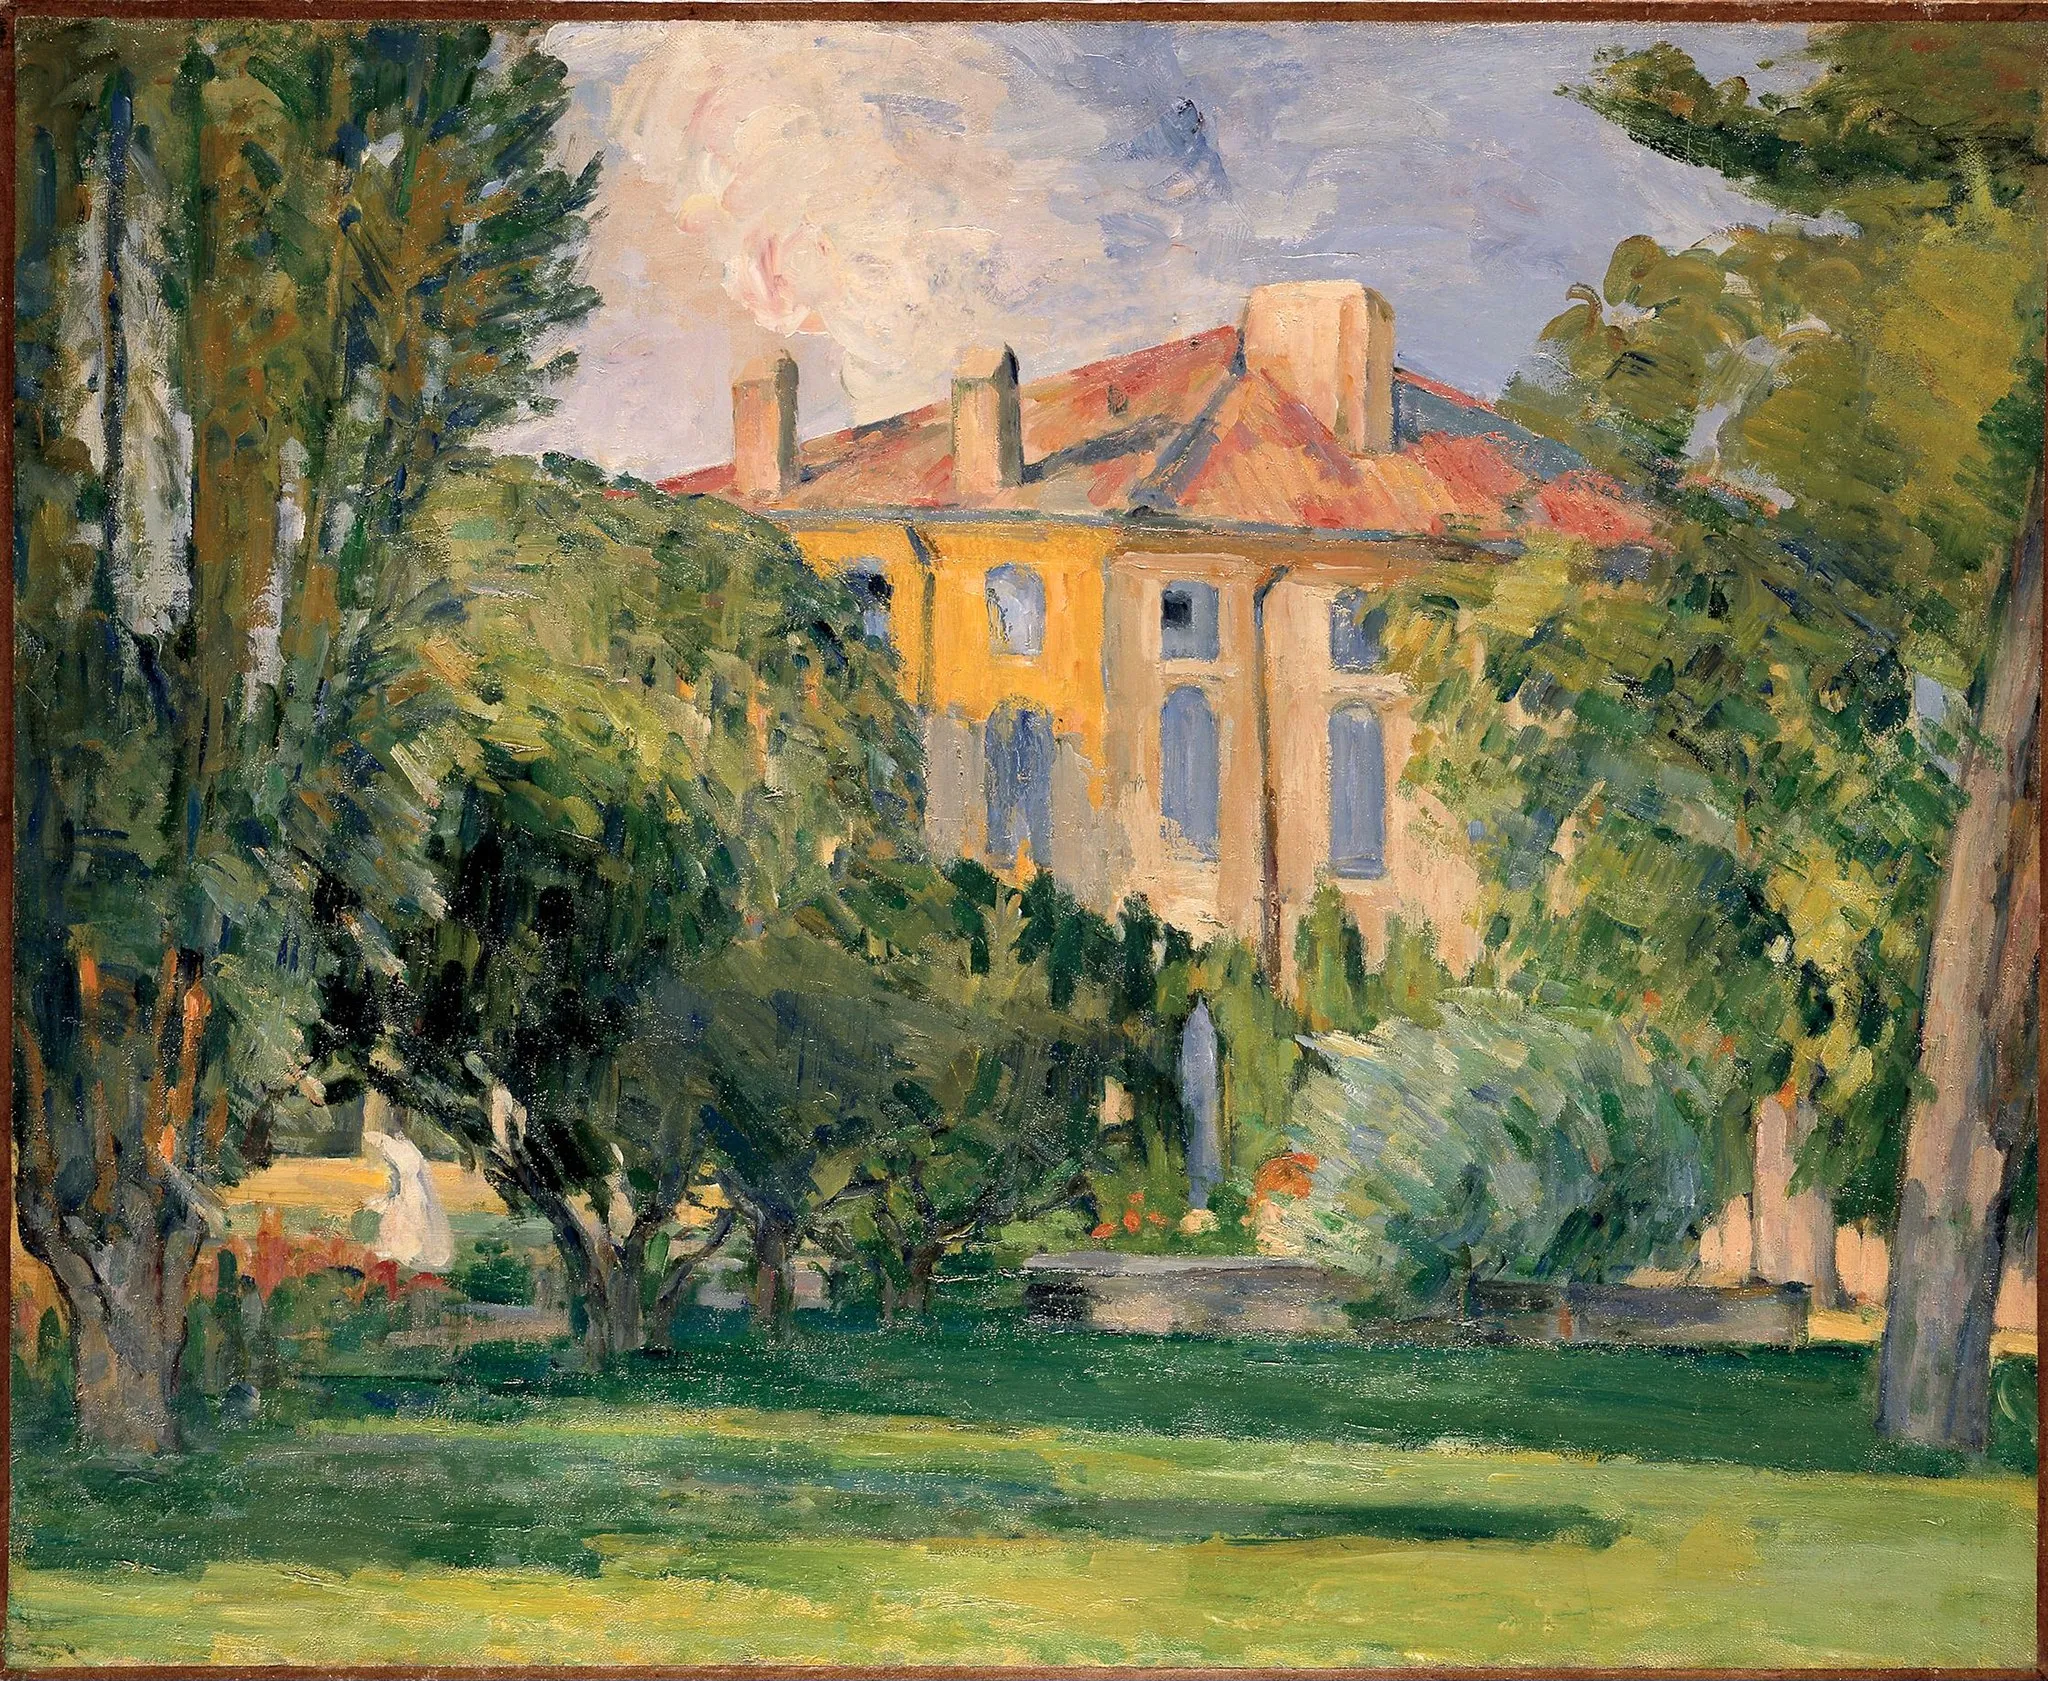 Photo showing: From the National Gallery of Art: This is one of the first Provençal paintings in which Cézanne applied the bright palette and free handling he had developed in Paris with Pissarro and the impressionists during the 1870s. The work was most likely executed in the summer of 1874, soon after Cézanne had returned home from Paris. He had written his parents that he hoped his father would finance a long stay at home in Aix: "I shall be very happy to work in the South, where the views offer so many opportunities for my painting."